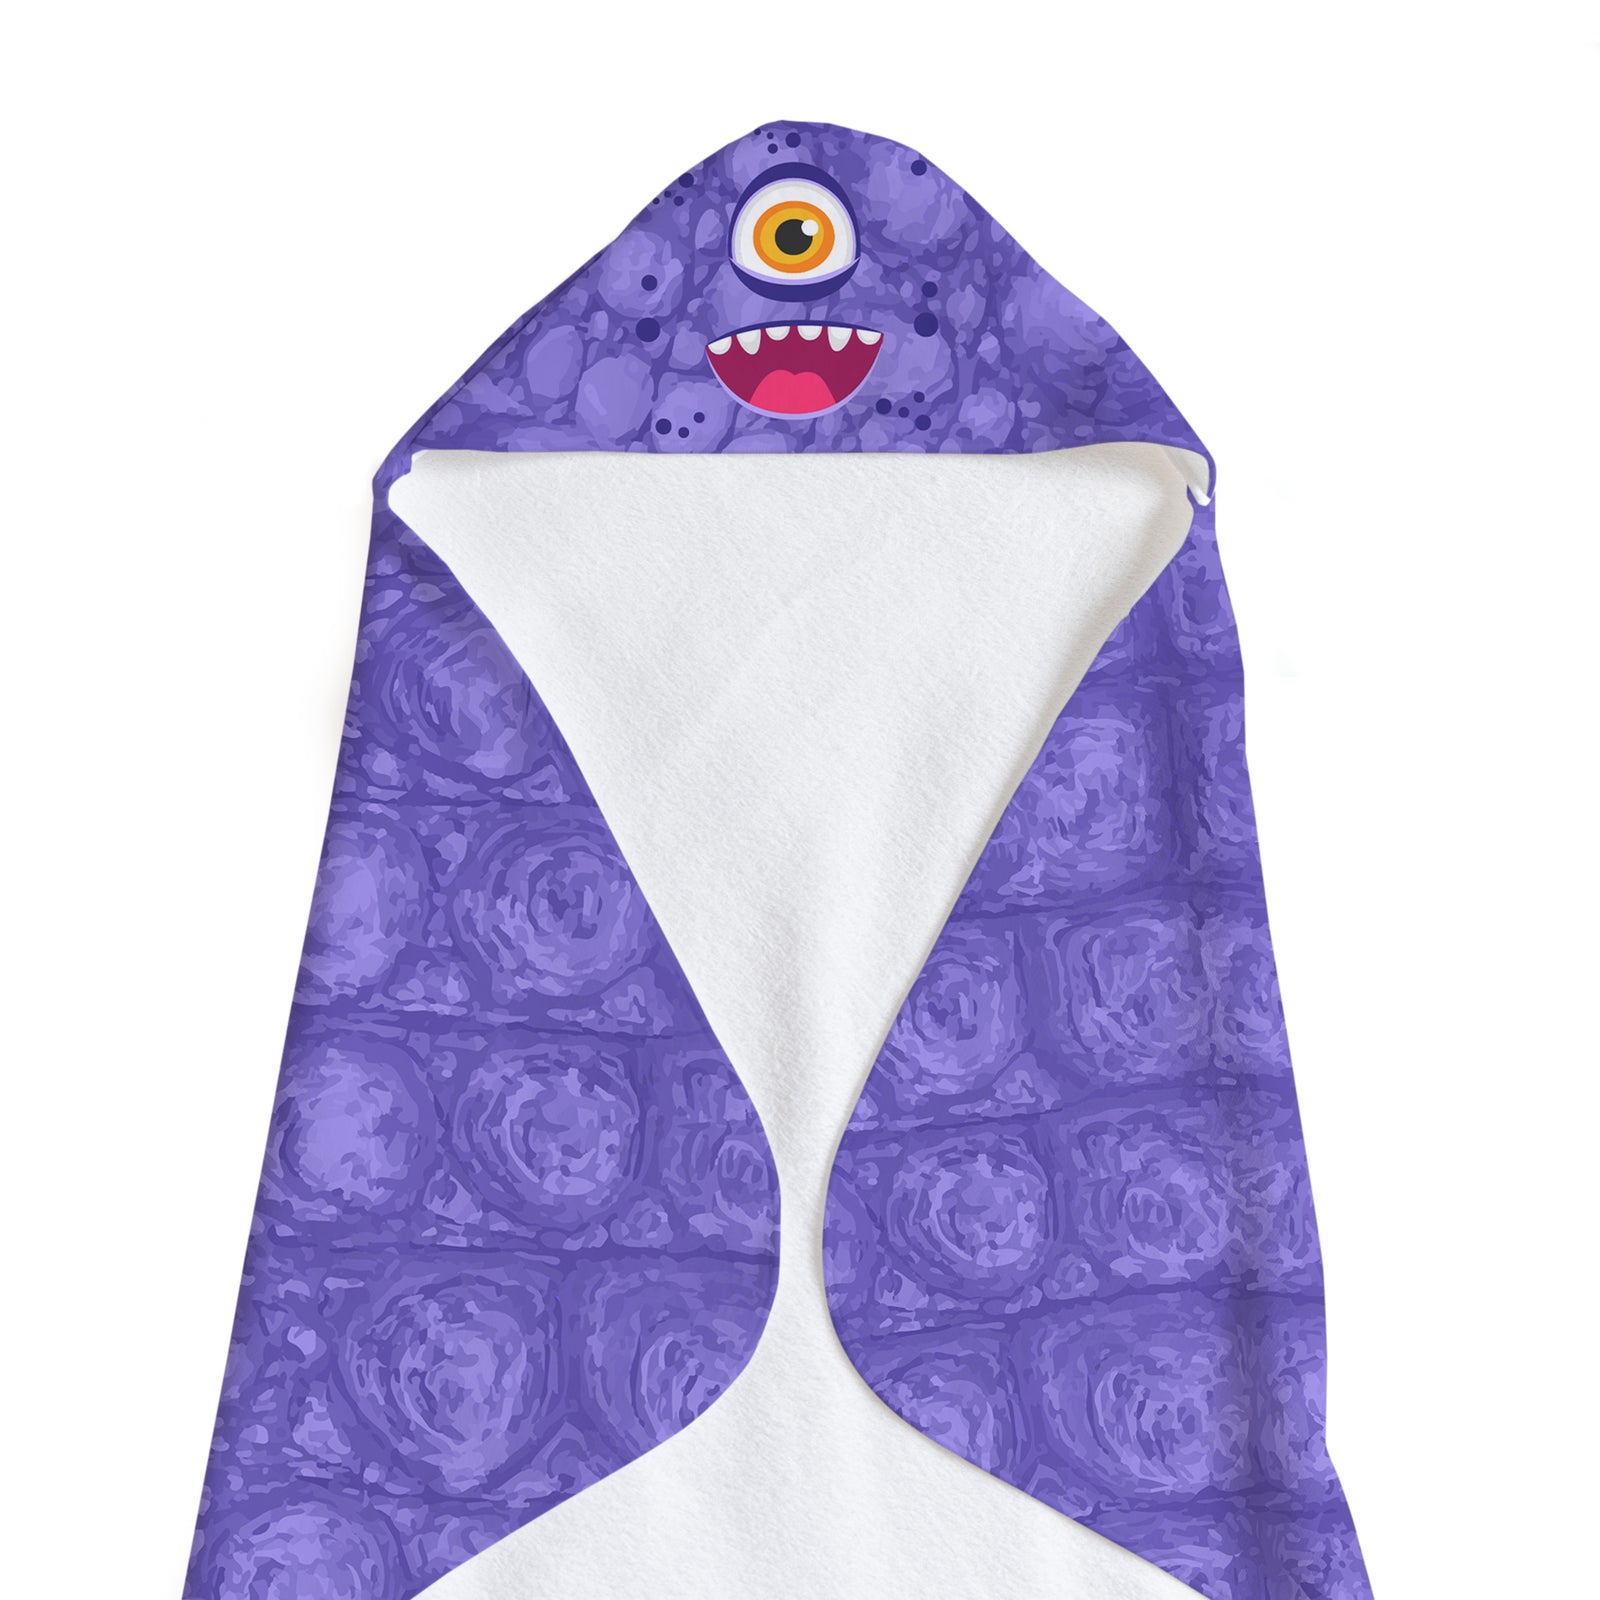 Buy this Purple Monster Soft and Absorbent Hooded Baby Towel